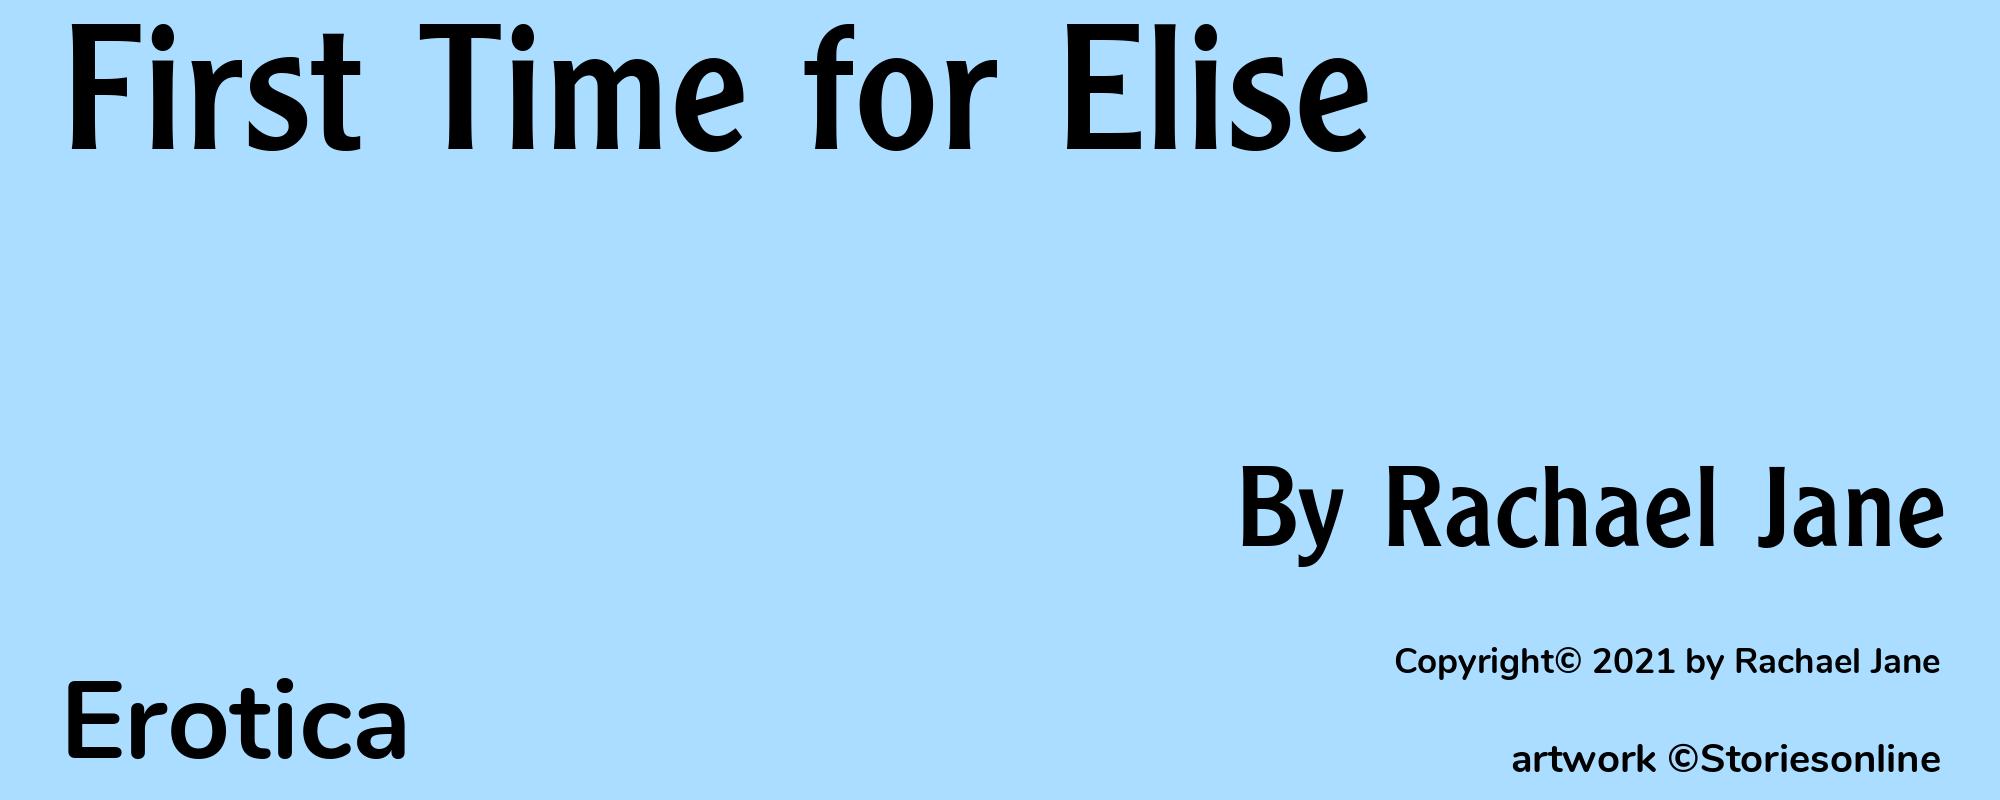 First Time for Elise - Cover